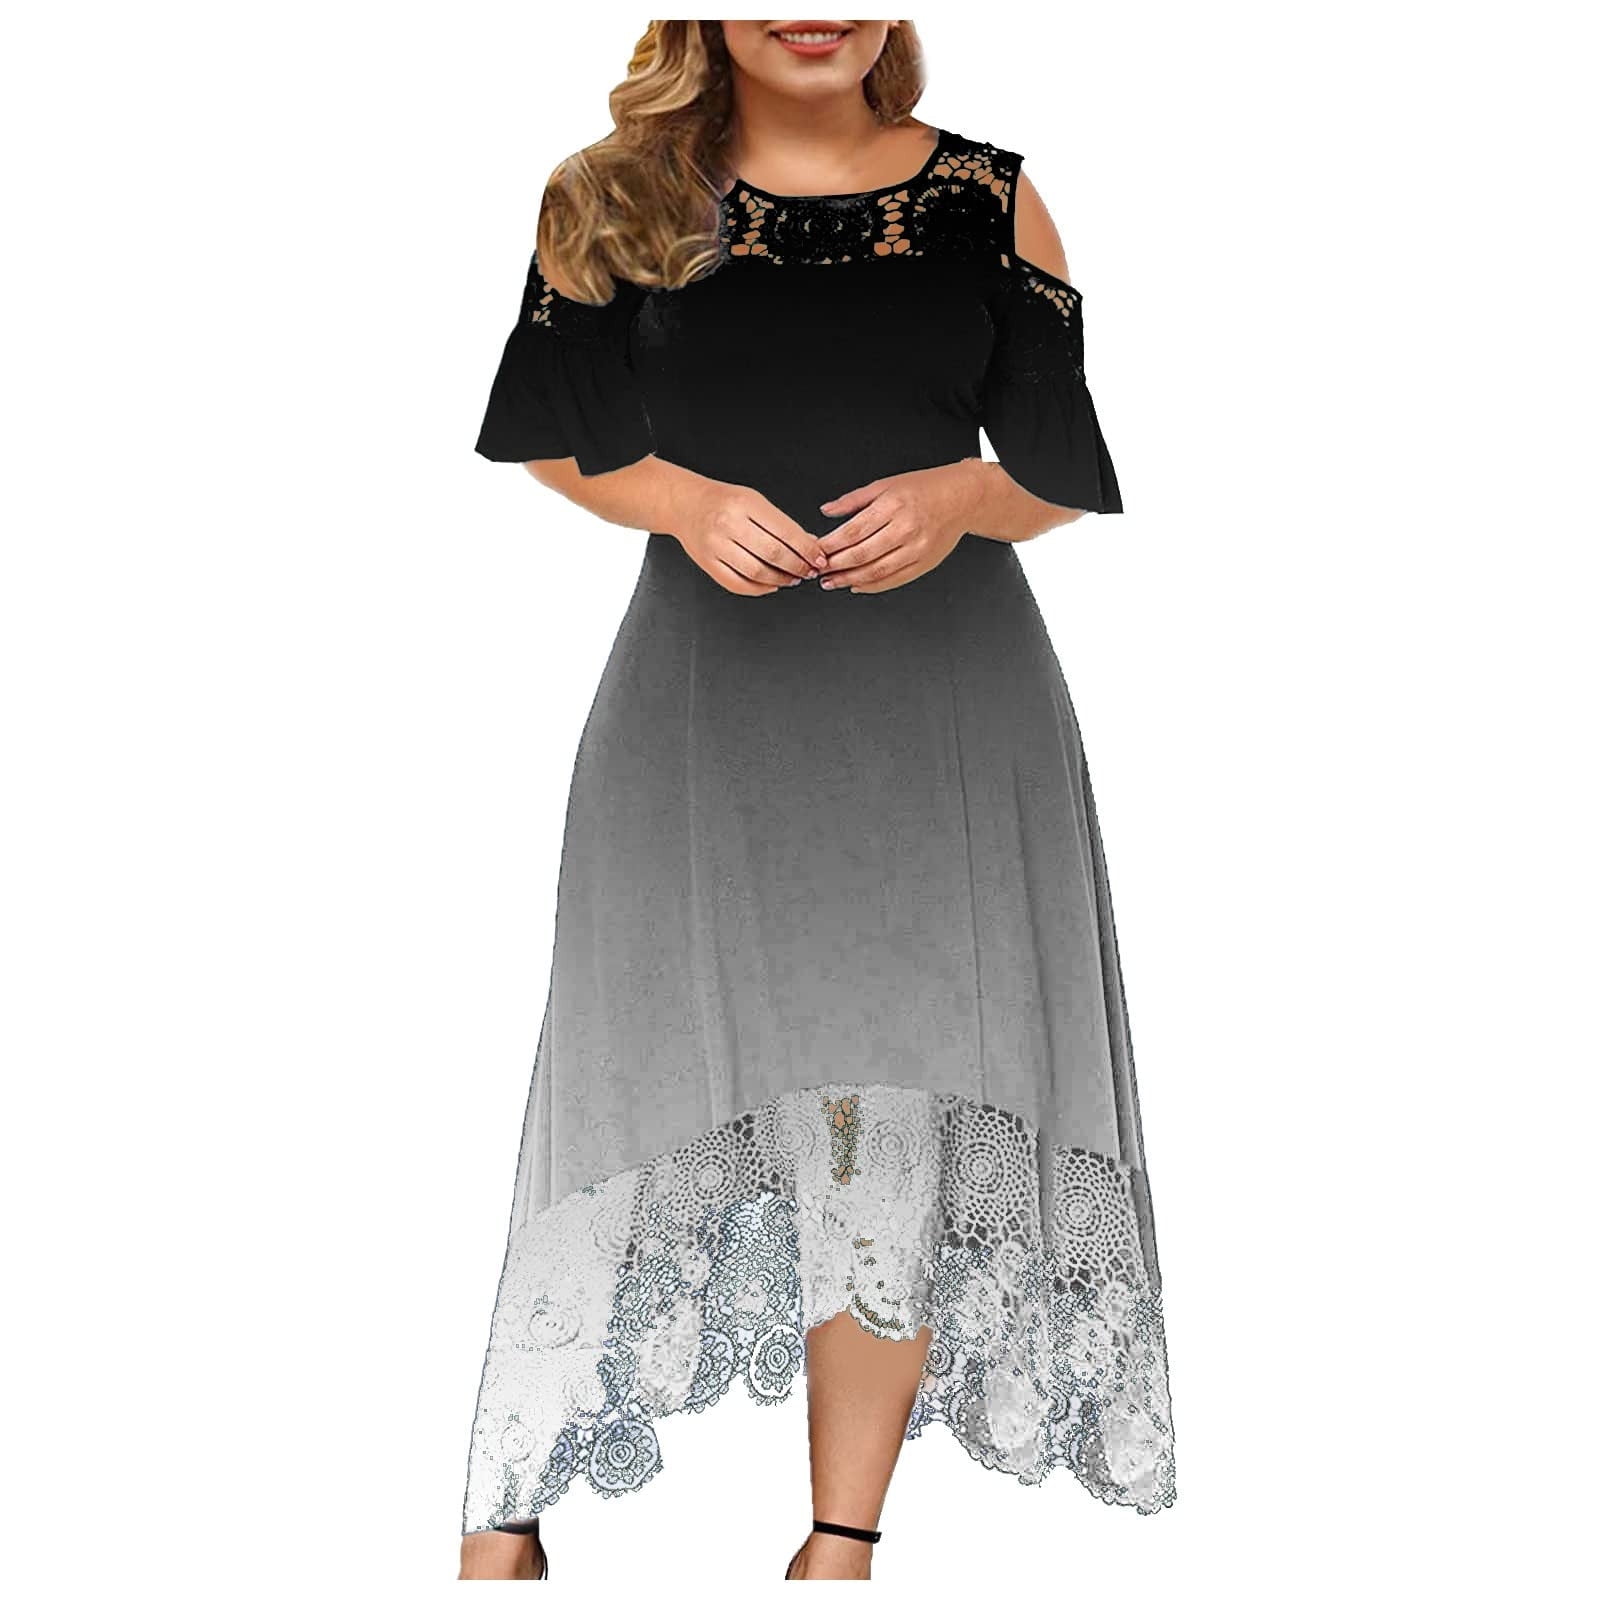 women Plus Size Scoop Neck Printed Sexy Lace Short Sleeve Dress Lace ...